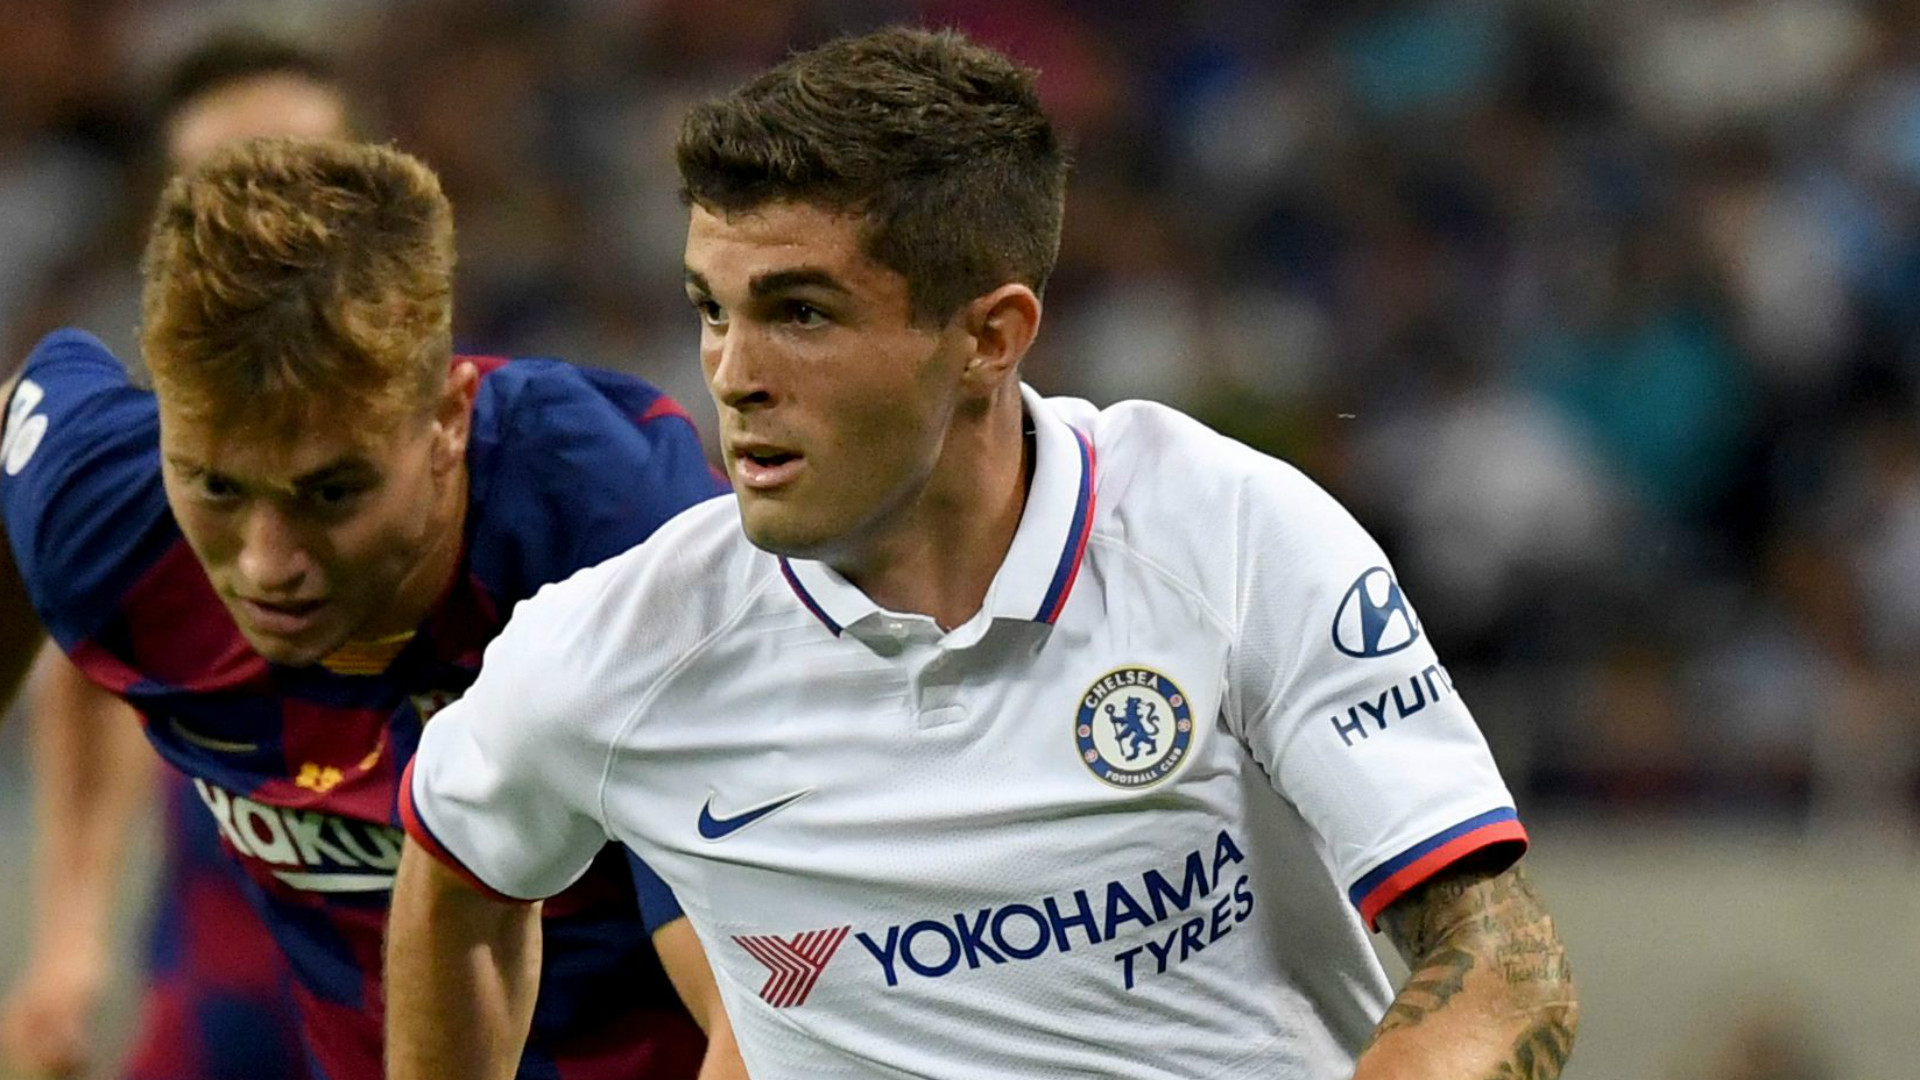 Chelsea news: Christian Pulisic can become one of the best players in